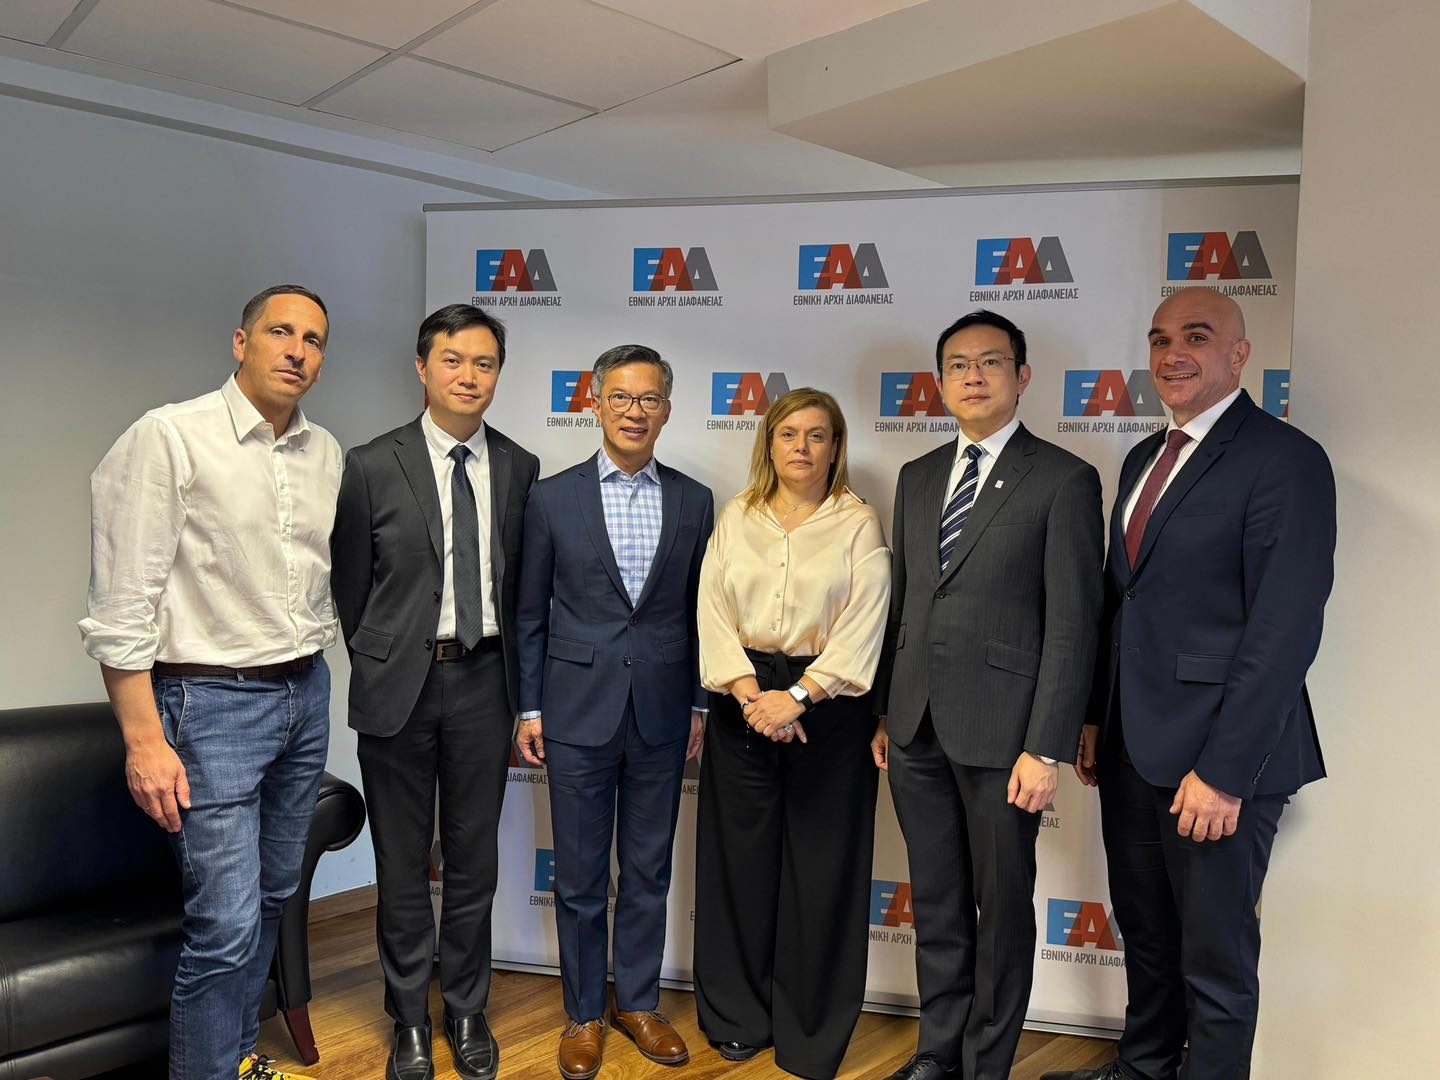 Deputy Commissioner Ricky Yau Shu-chun (third left) meets with Interim Governor of National Transparency Authority Alexandra Rogkakou (third right), who is also an Executive Committee member of IAACA.